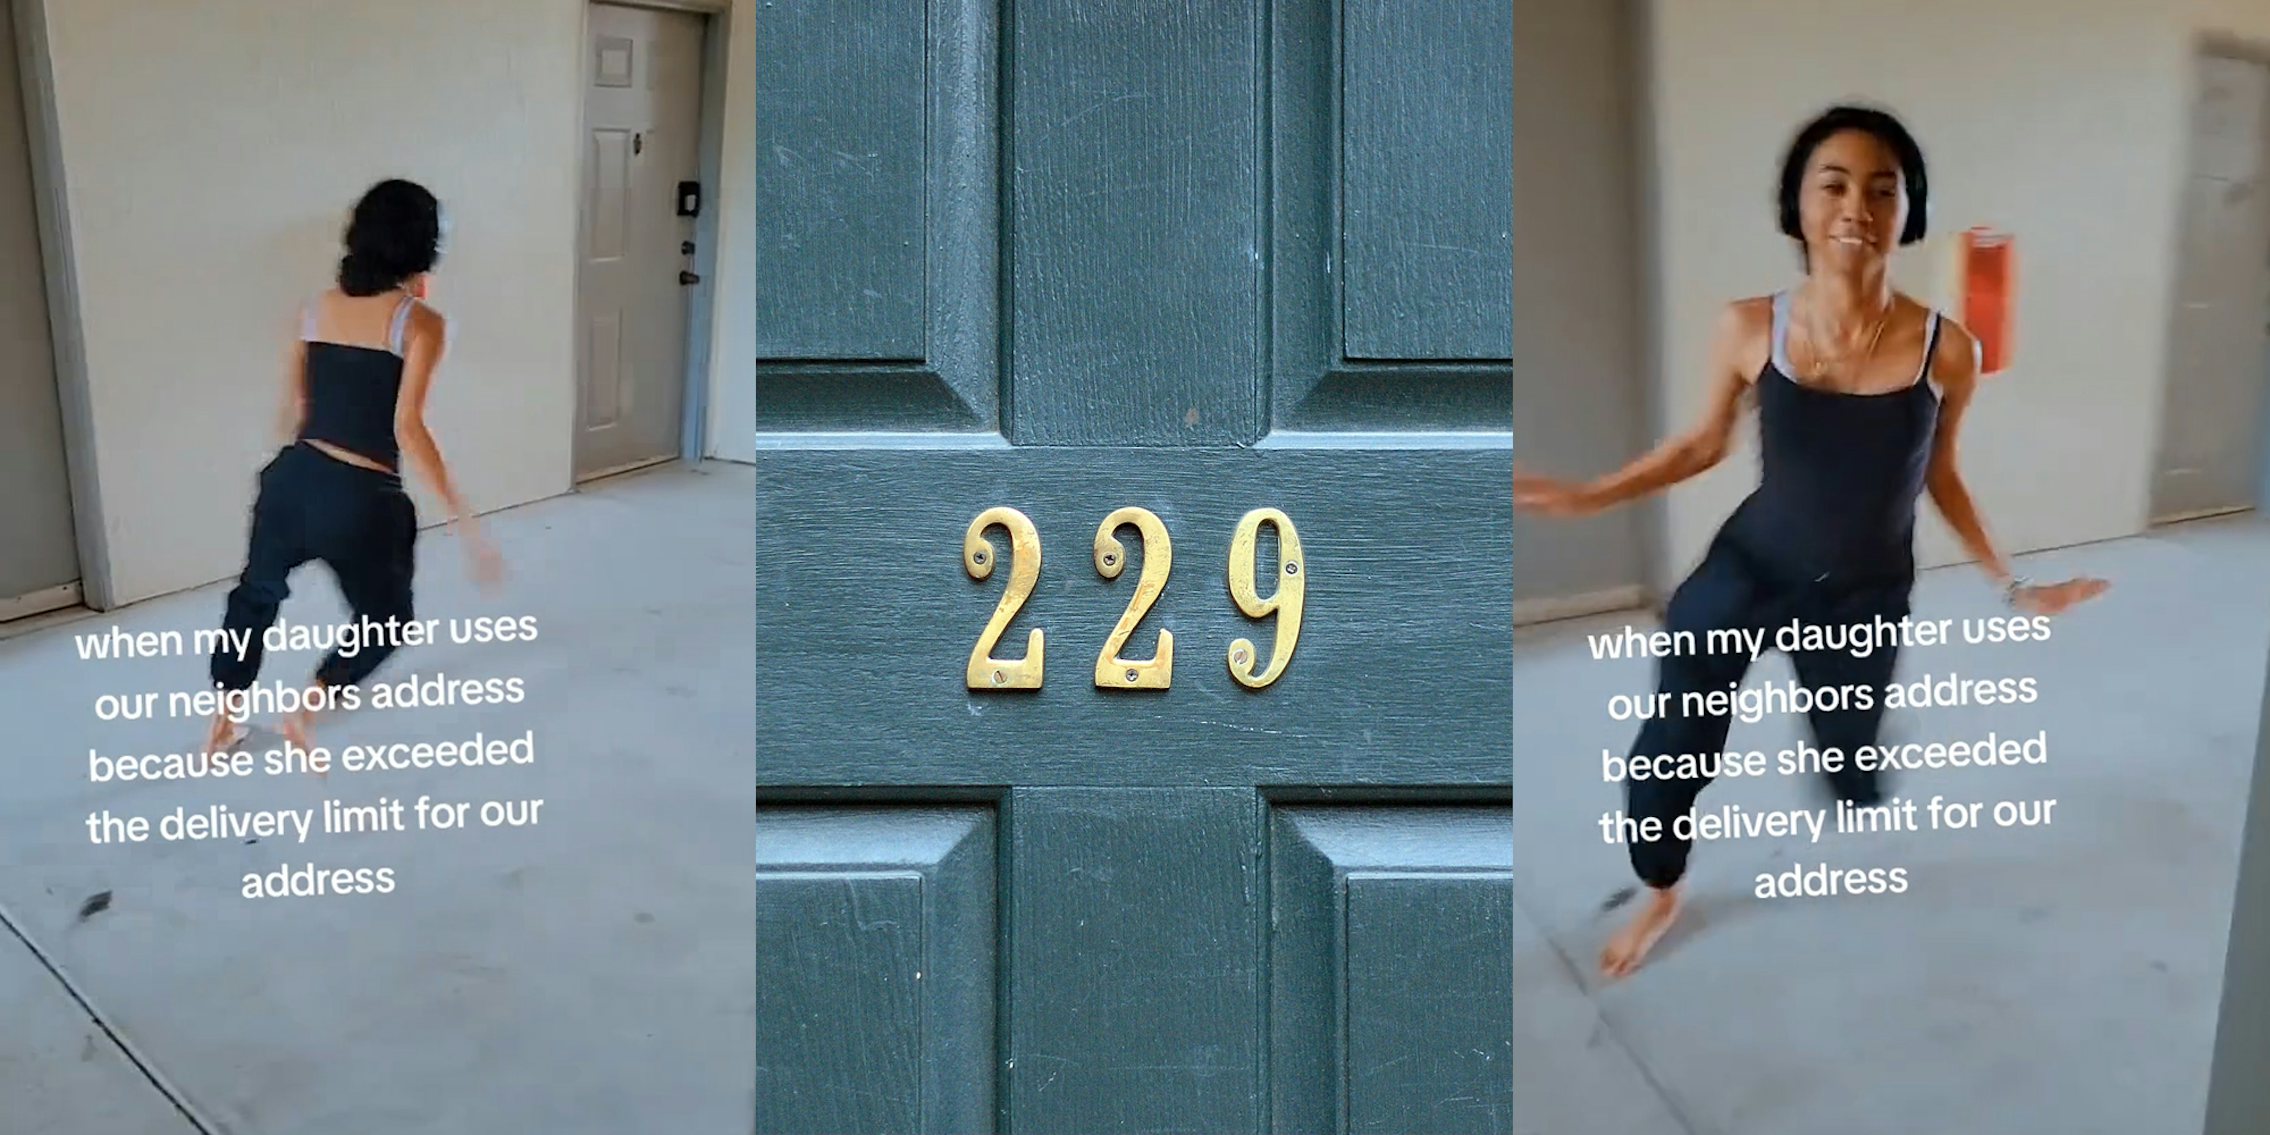 girl running with caption 'when my daughter uses our neighbors address because she exceeded the delivery limit for our address' (l) house door with 229 on door (c) girl running with caption 'when my daughter uses our neighbors address because she exceeded the delivery limit for our address' (r)